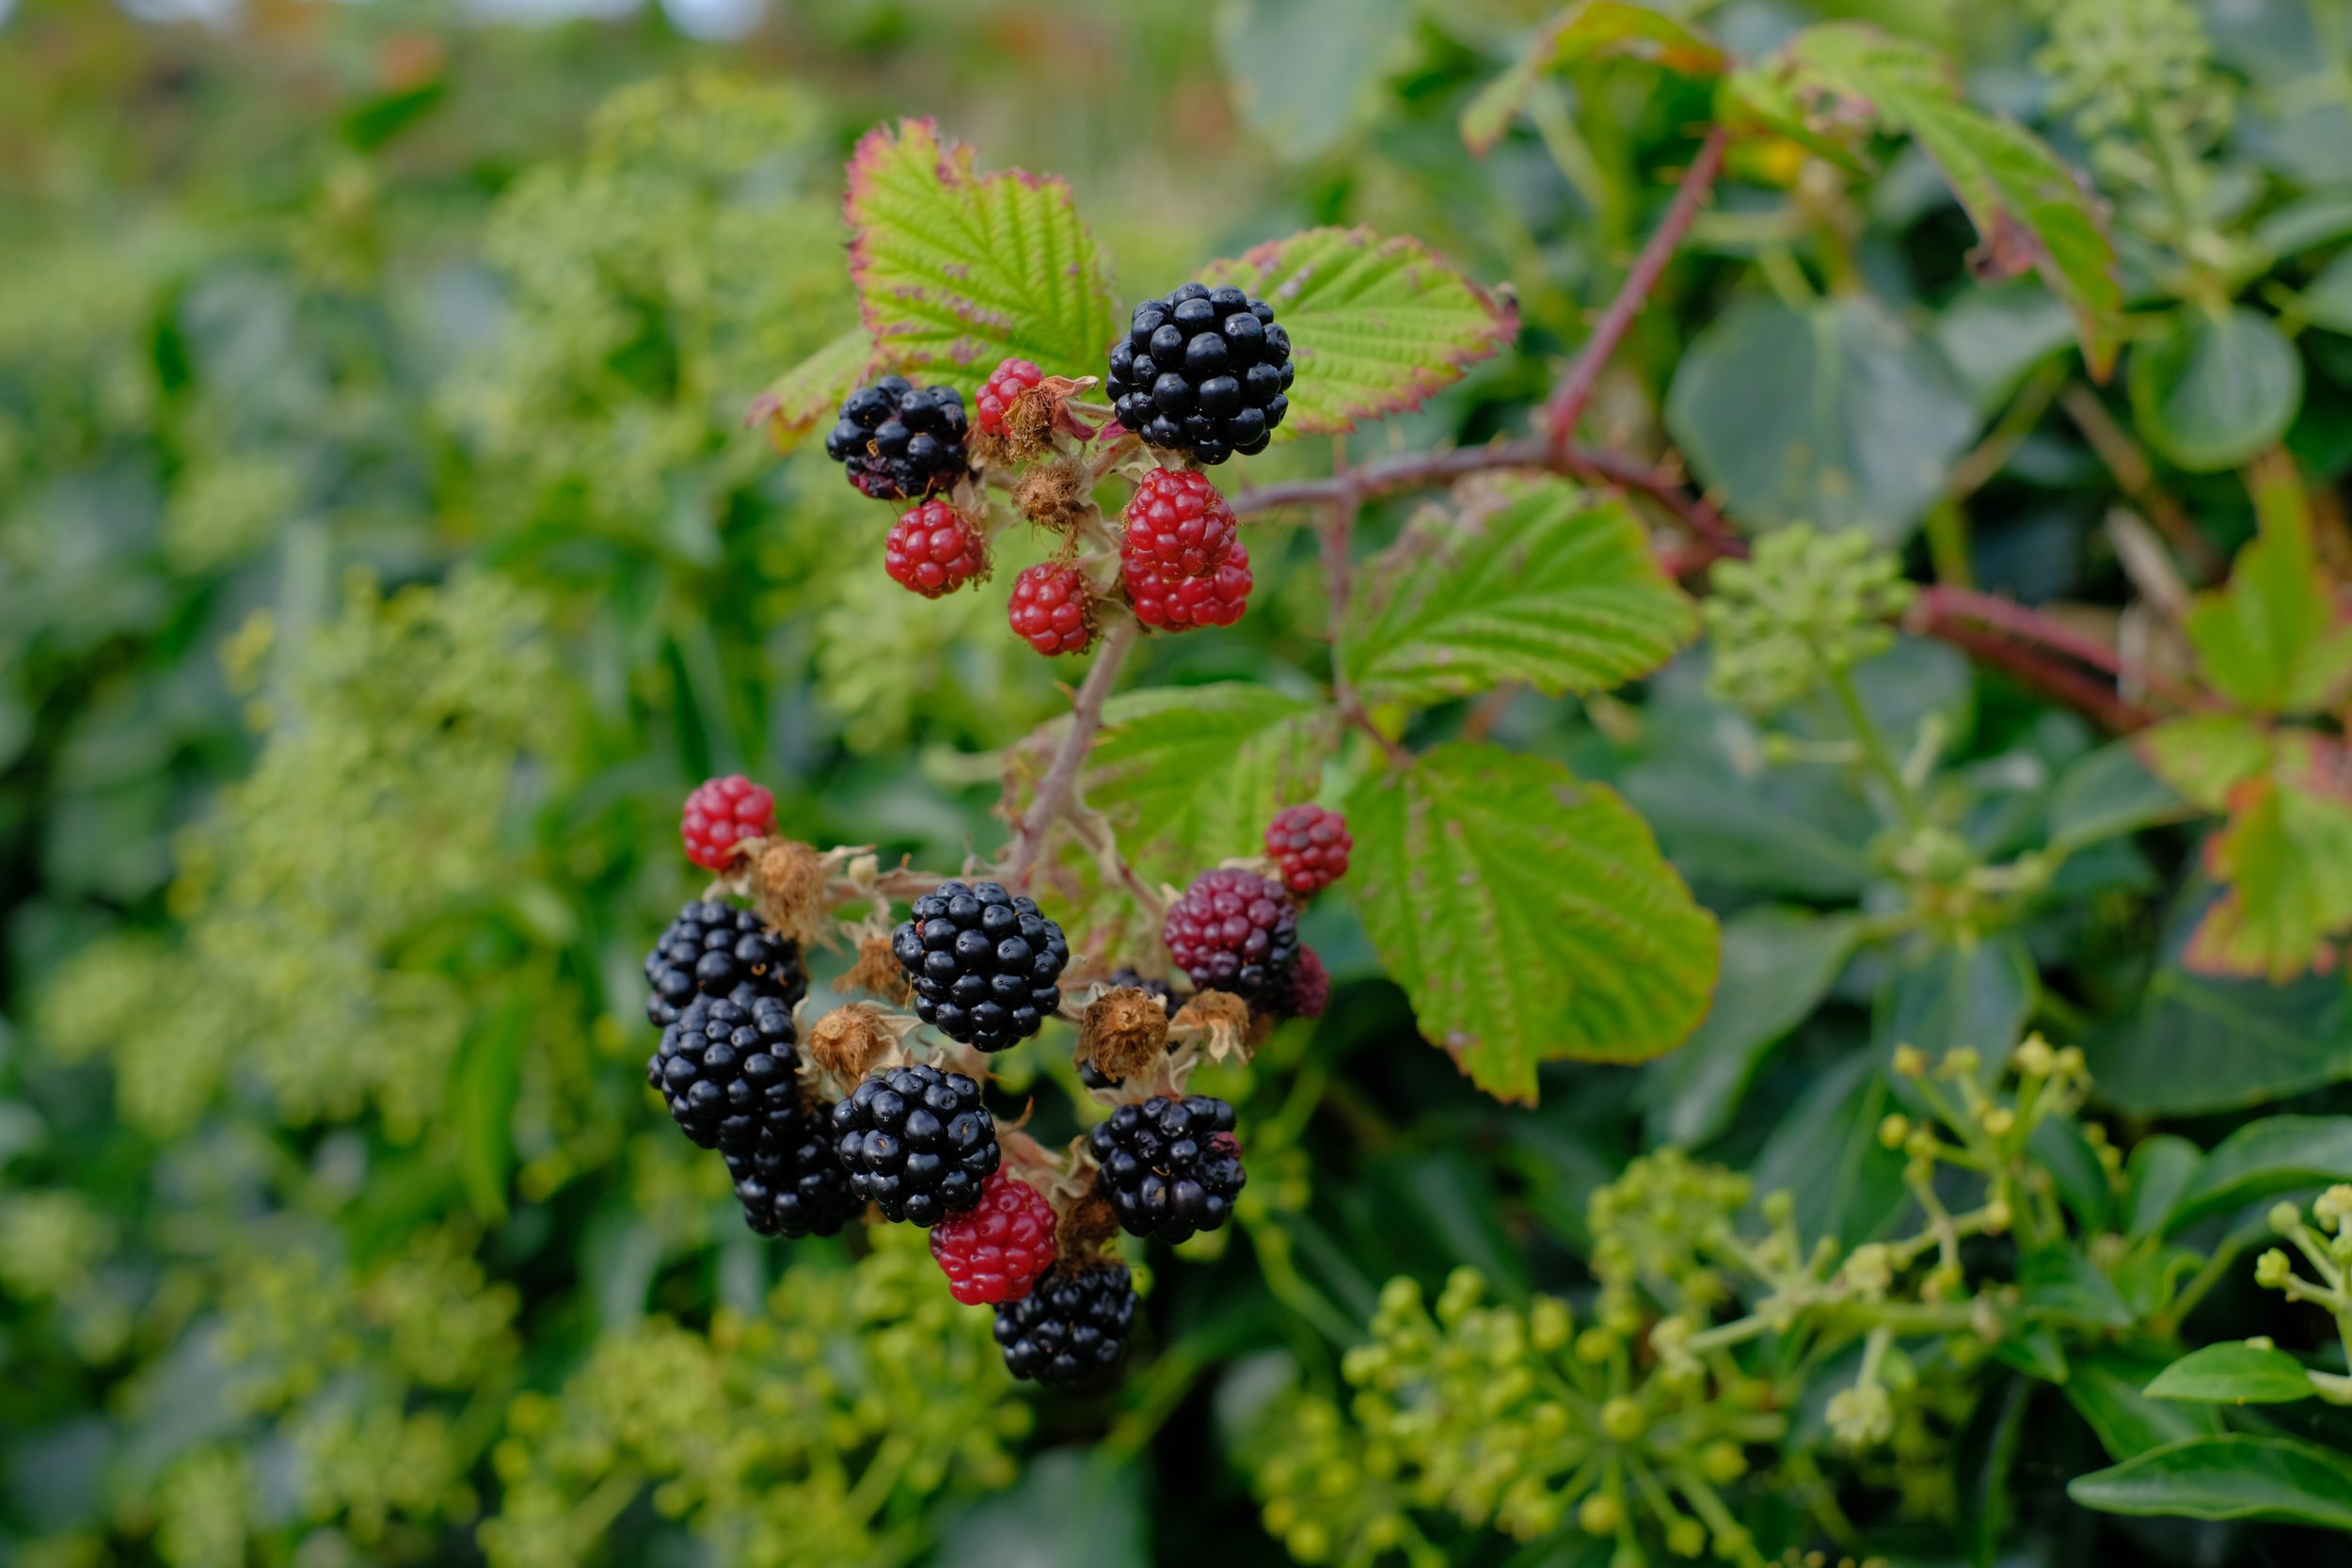 10a_The hedgerows are full of blackberries in early autumn. Photo credit Calum Sweeney.JPG